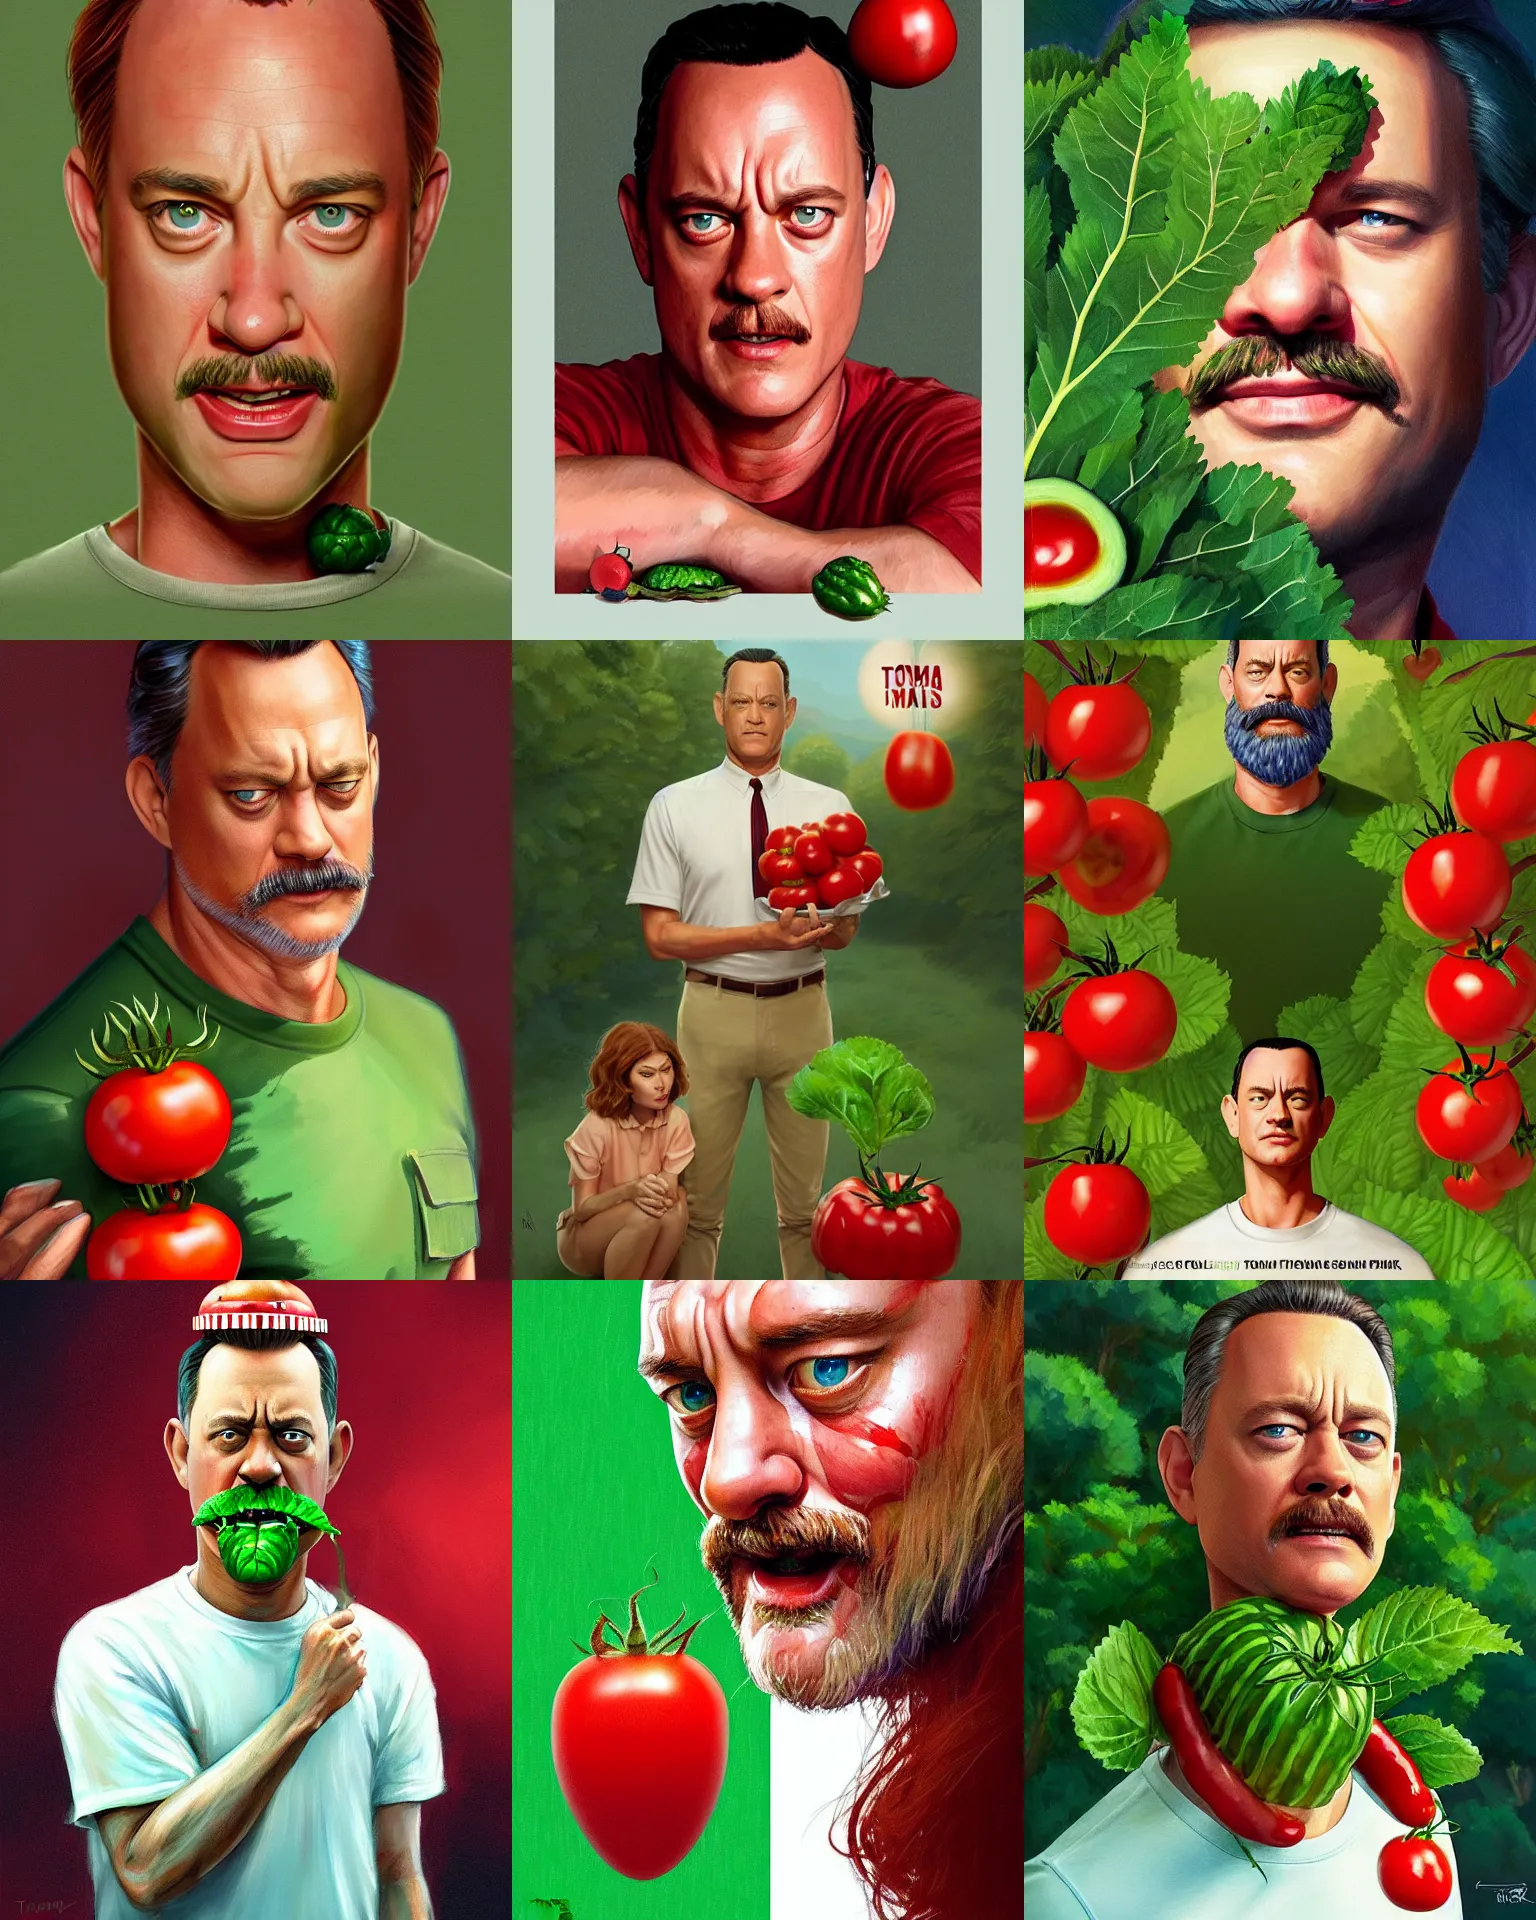 Prompt: forest gump starring tom hank sas a tomato, his skin is red with leafy green hair, pickle rick animation character, dramatic lighting, tom hanks tomato face, shaded lighting poster by magali villeneuve, artgerm, jeremy lipkin and michael garmash, rob rey and kentaro miura style, artstation